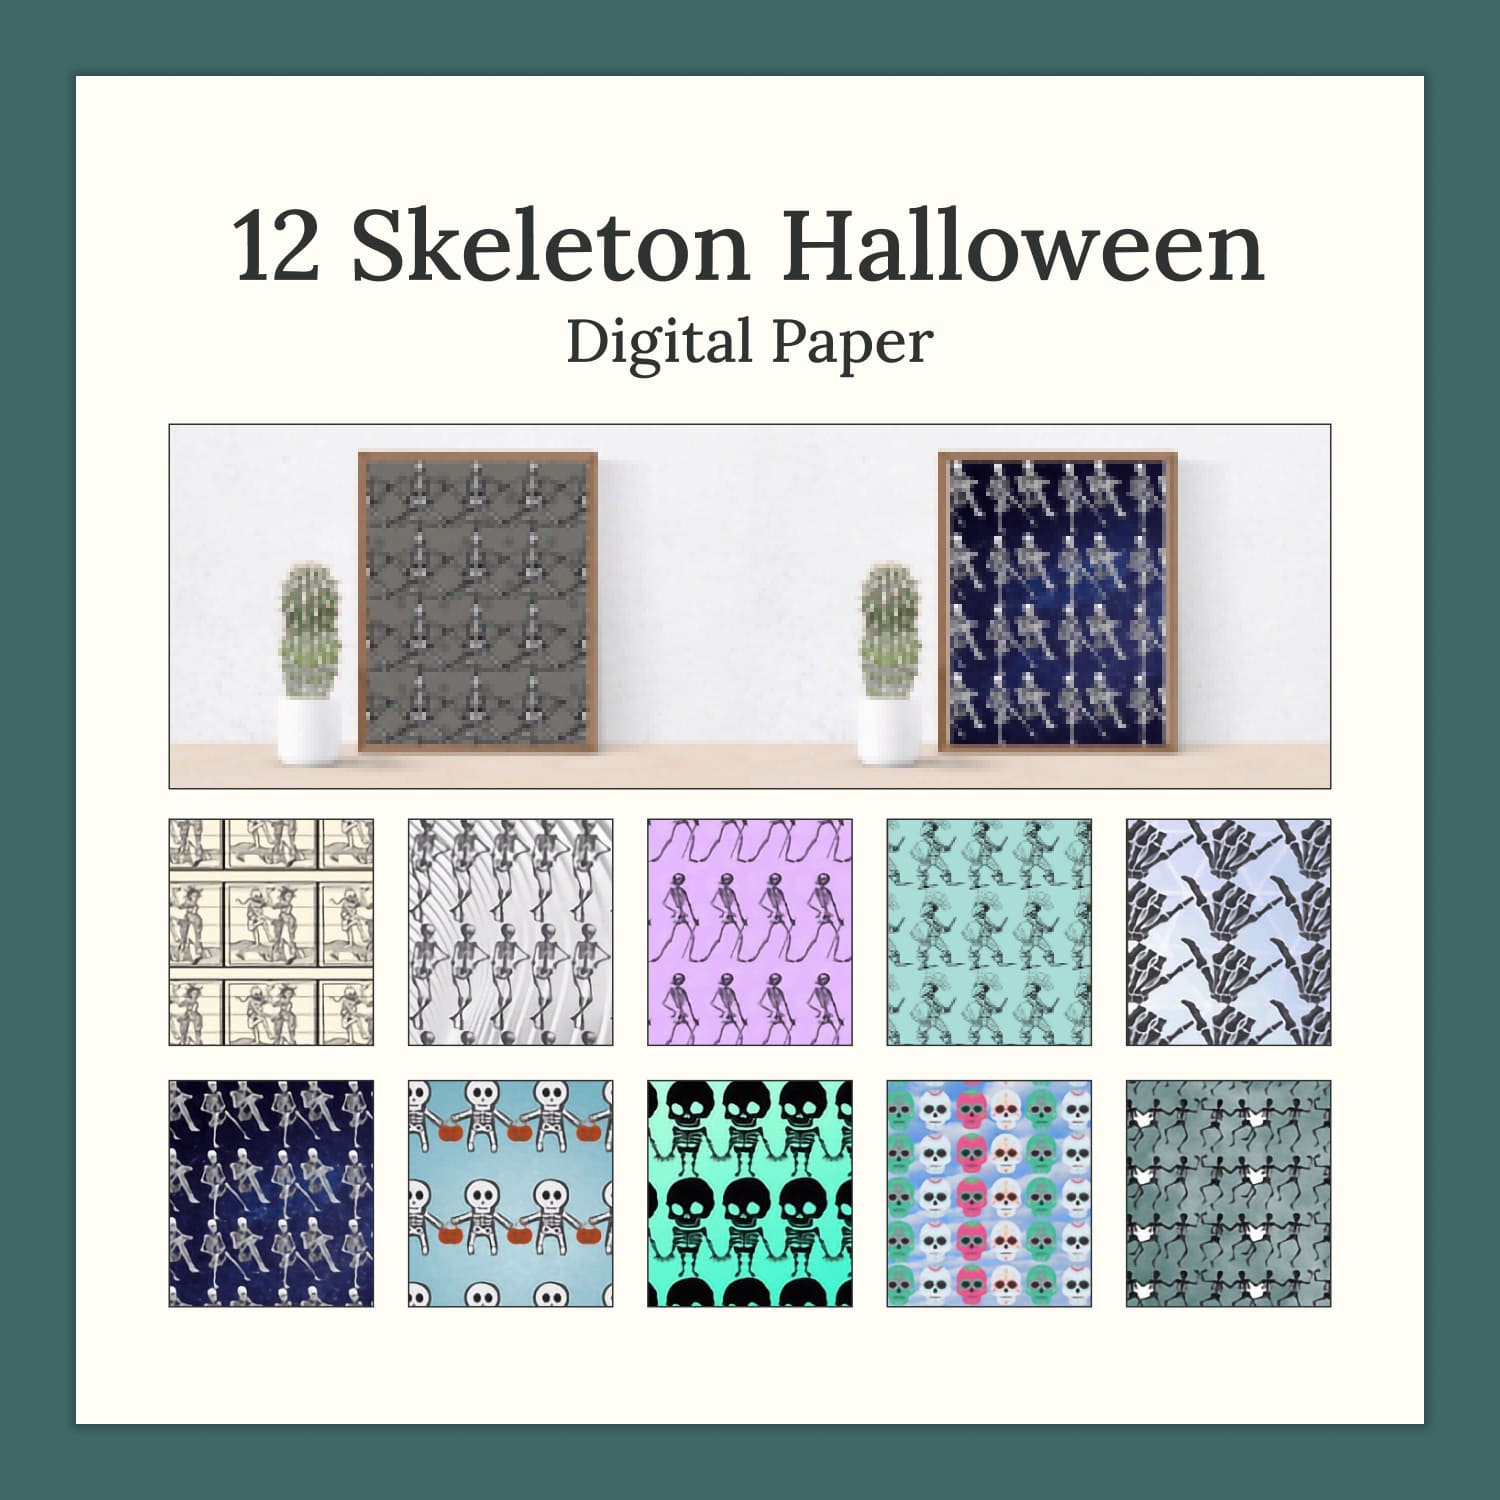 Pack of irresistible paper retro patterns with skeletons.